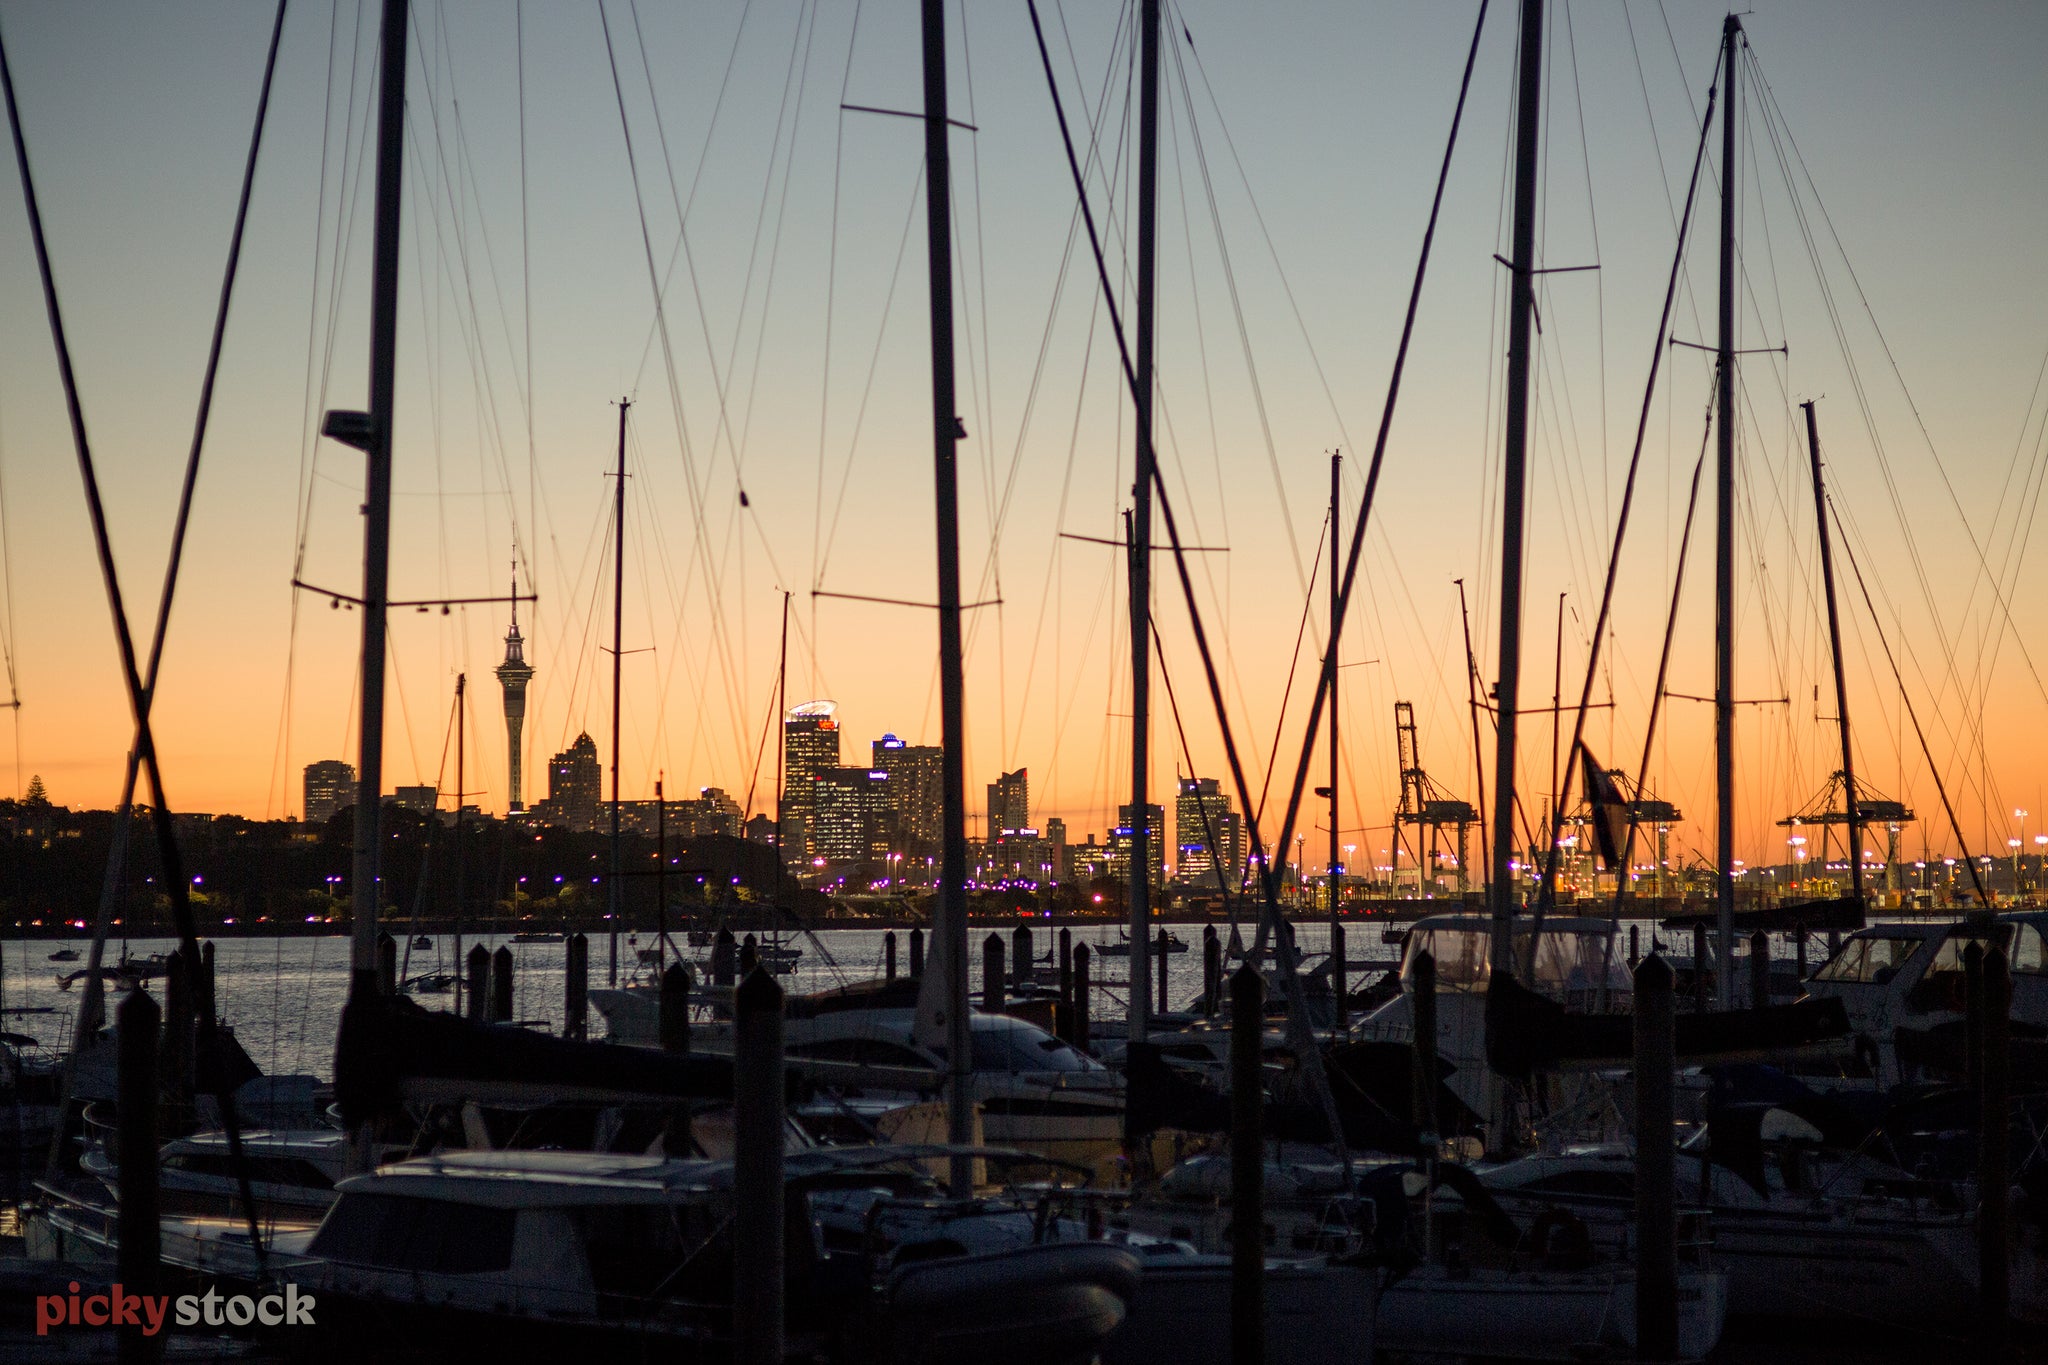 Looking through the silhouetted masts of sailboats, back towards Auckland City. The sun is setting on a perfect day, the city lights just turning on. 